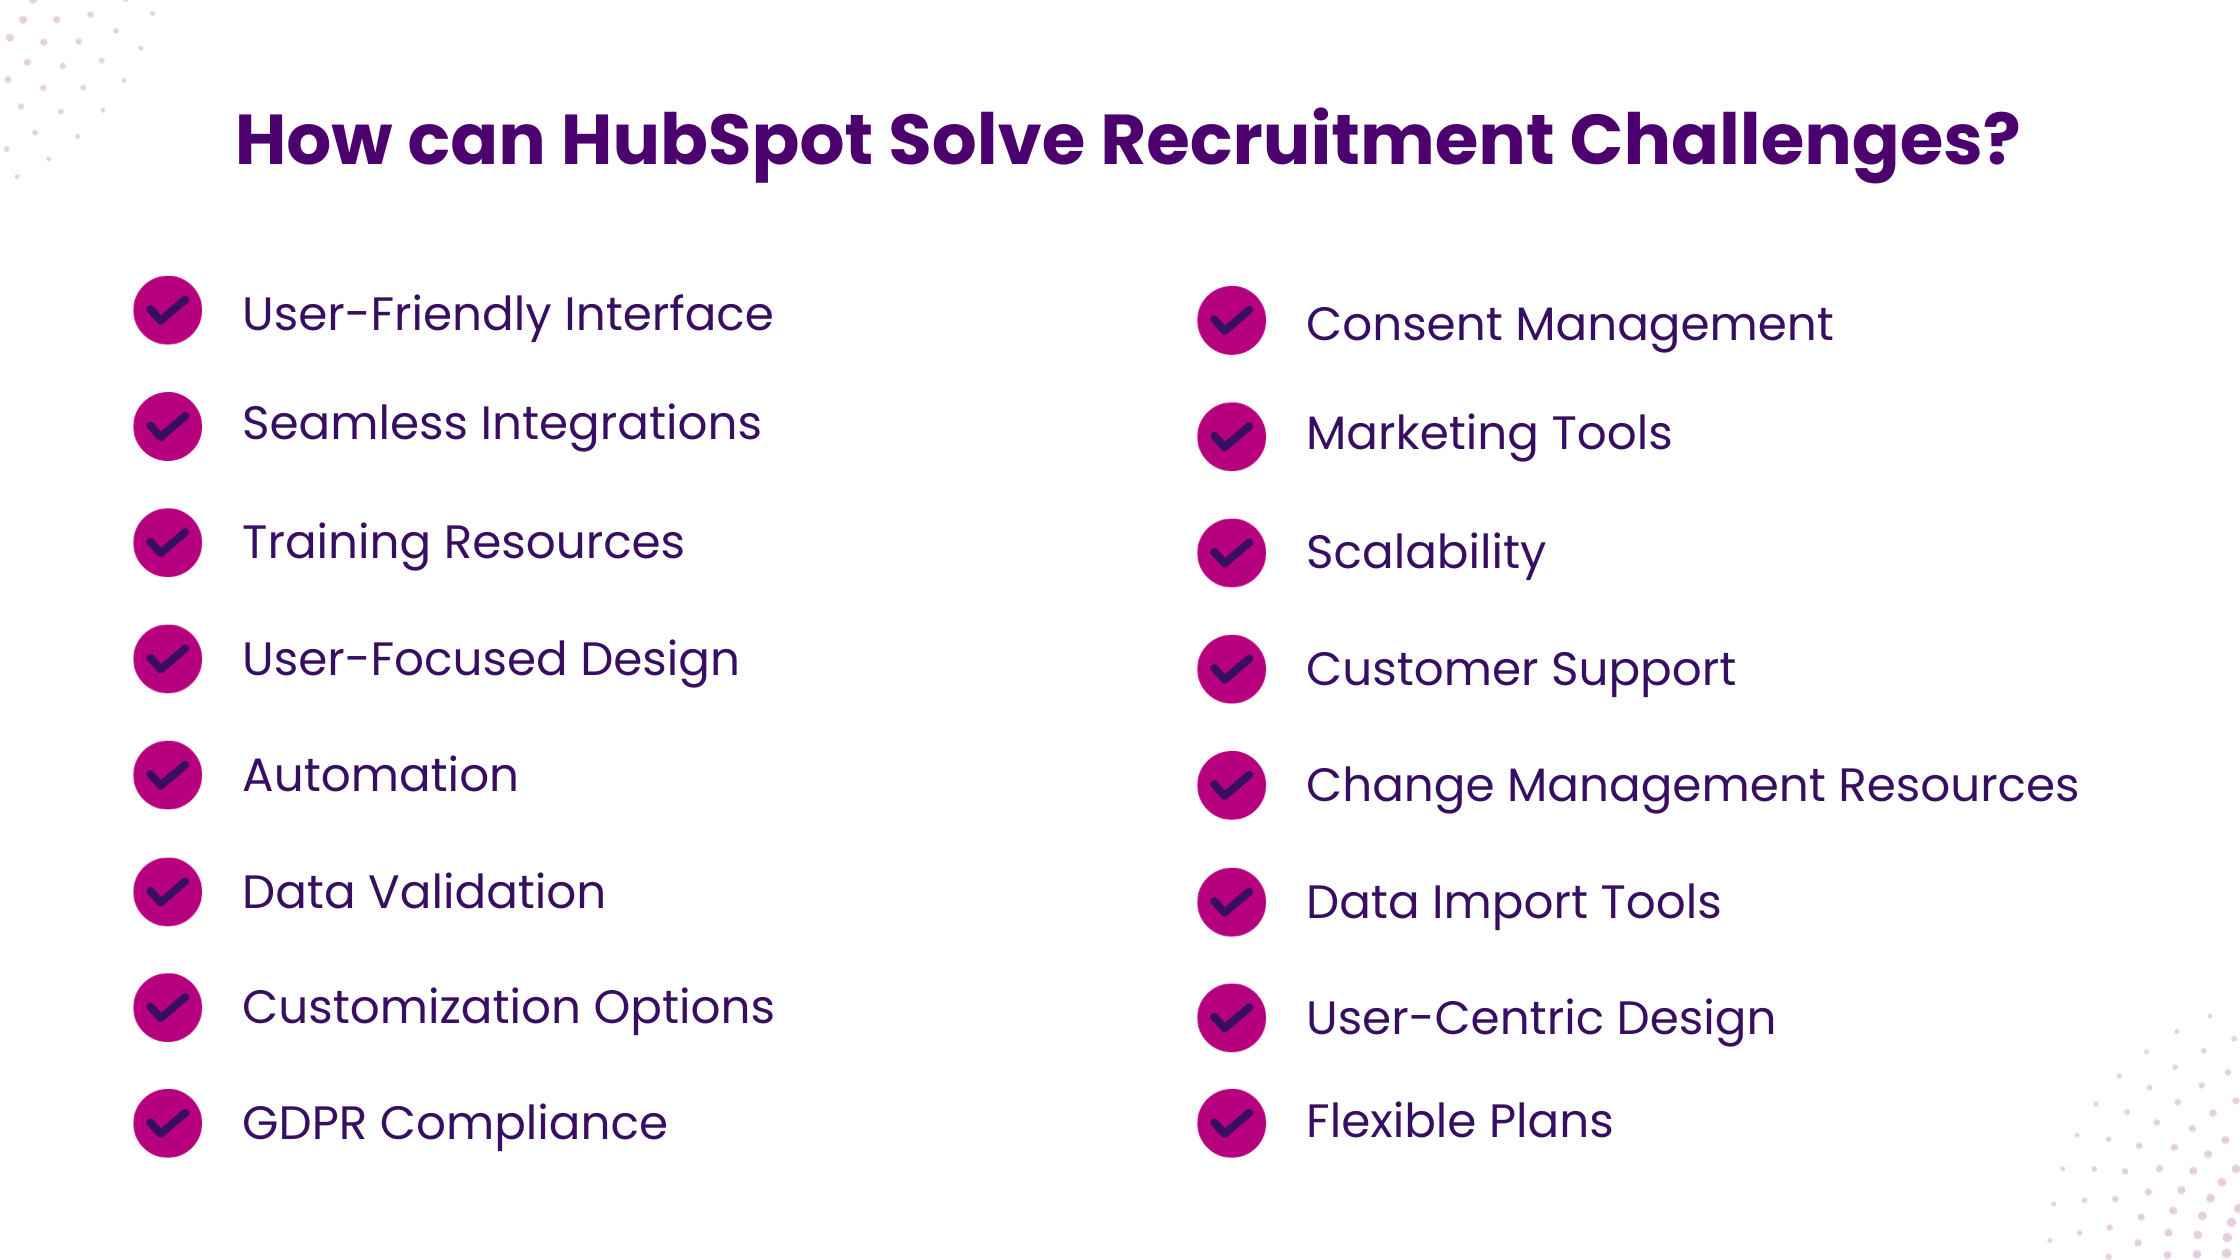 How can HubSpot Solve Recruitment Challenges